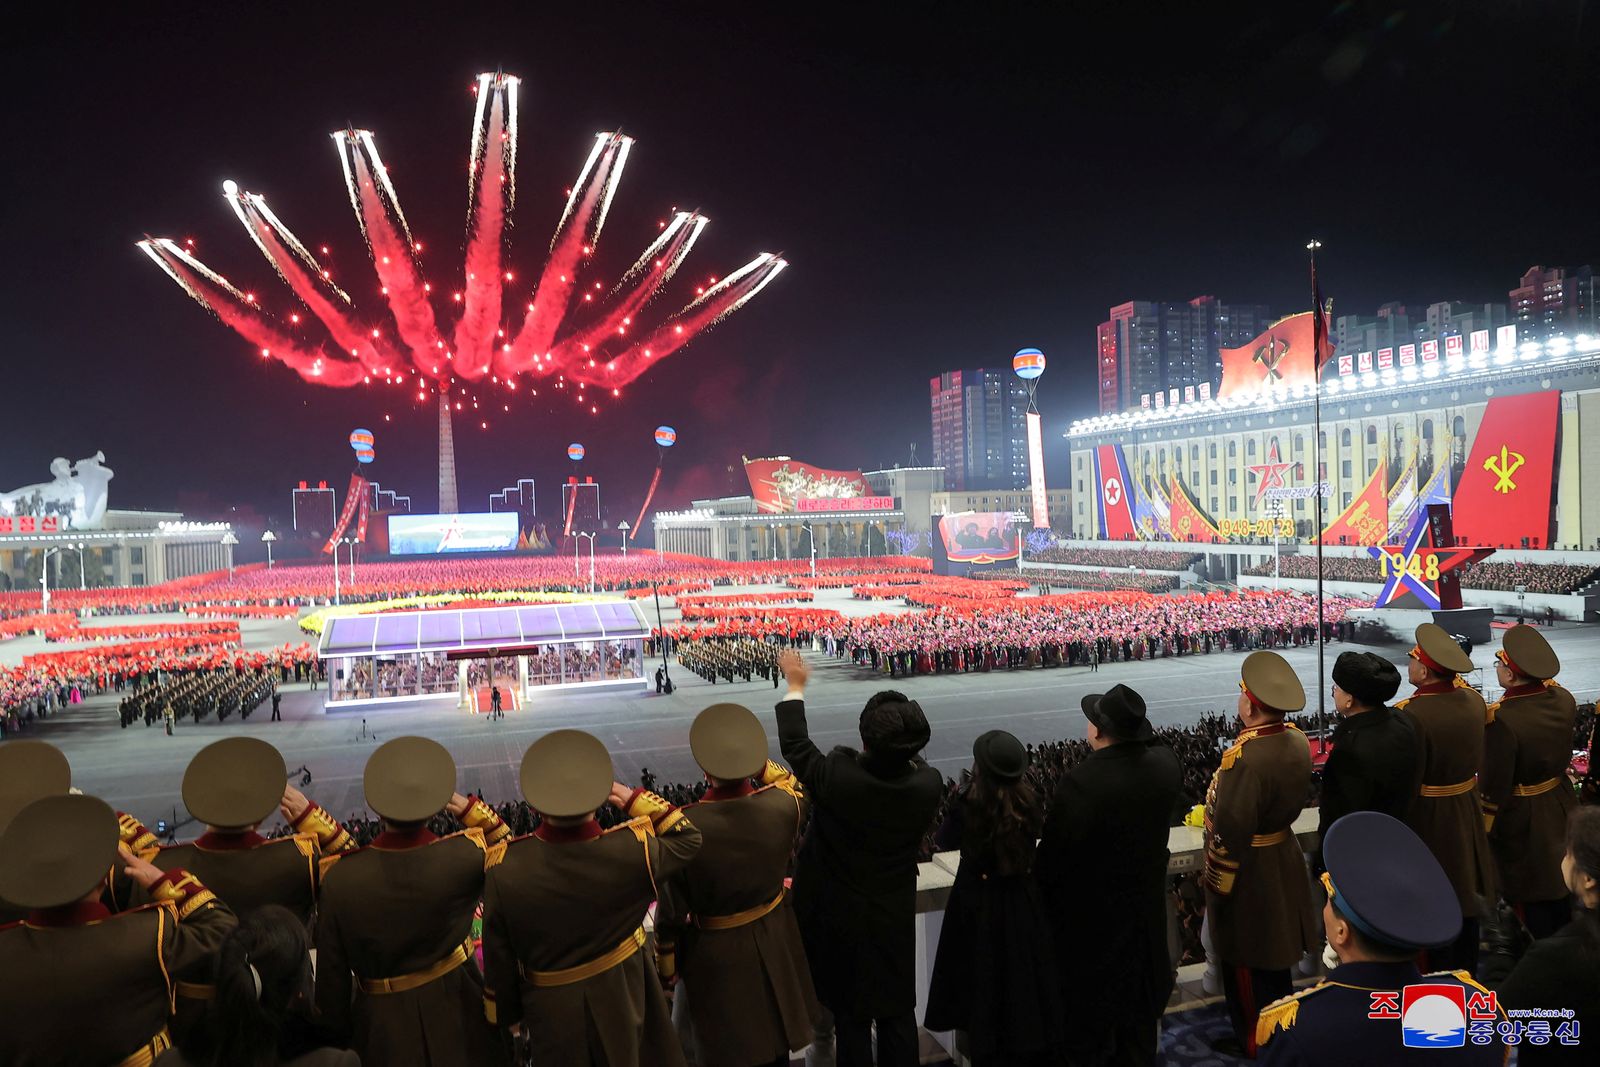 Military parade to mark the founding anniversary of North Korea's army, at Kim Il Sung Square in Pyongyang - via REUTERS